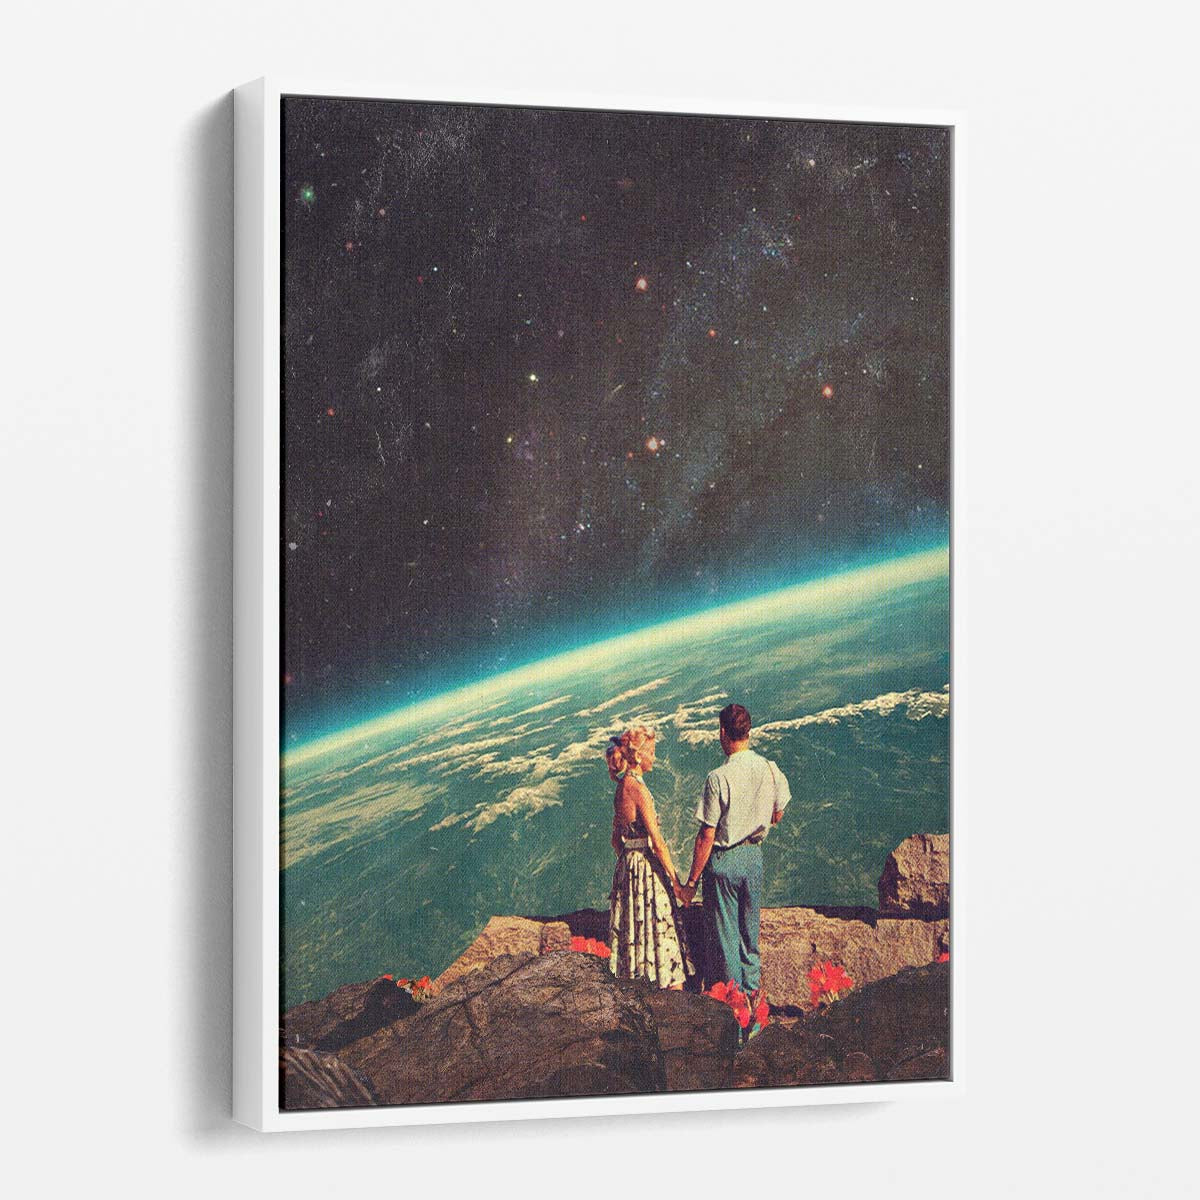 Romantic Galaxy Love Collage Illustration by Frank Moth by Luxuriance Designs, made in USA